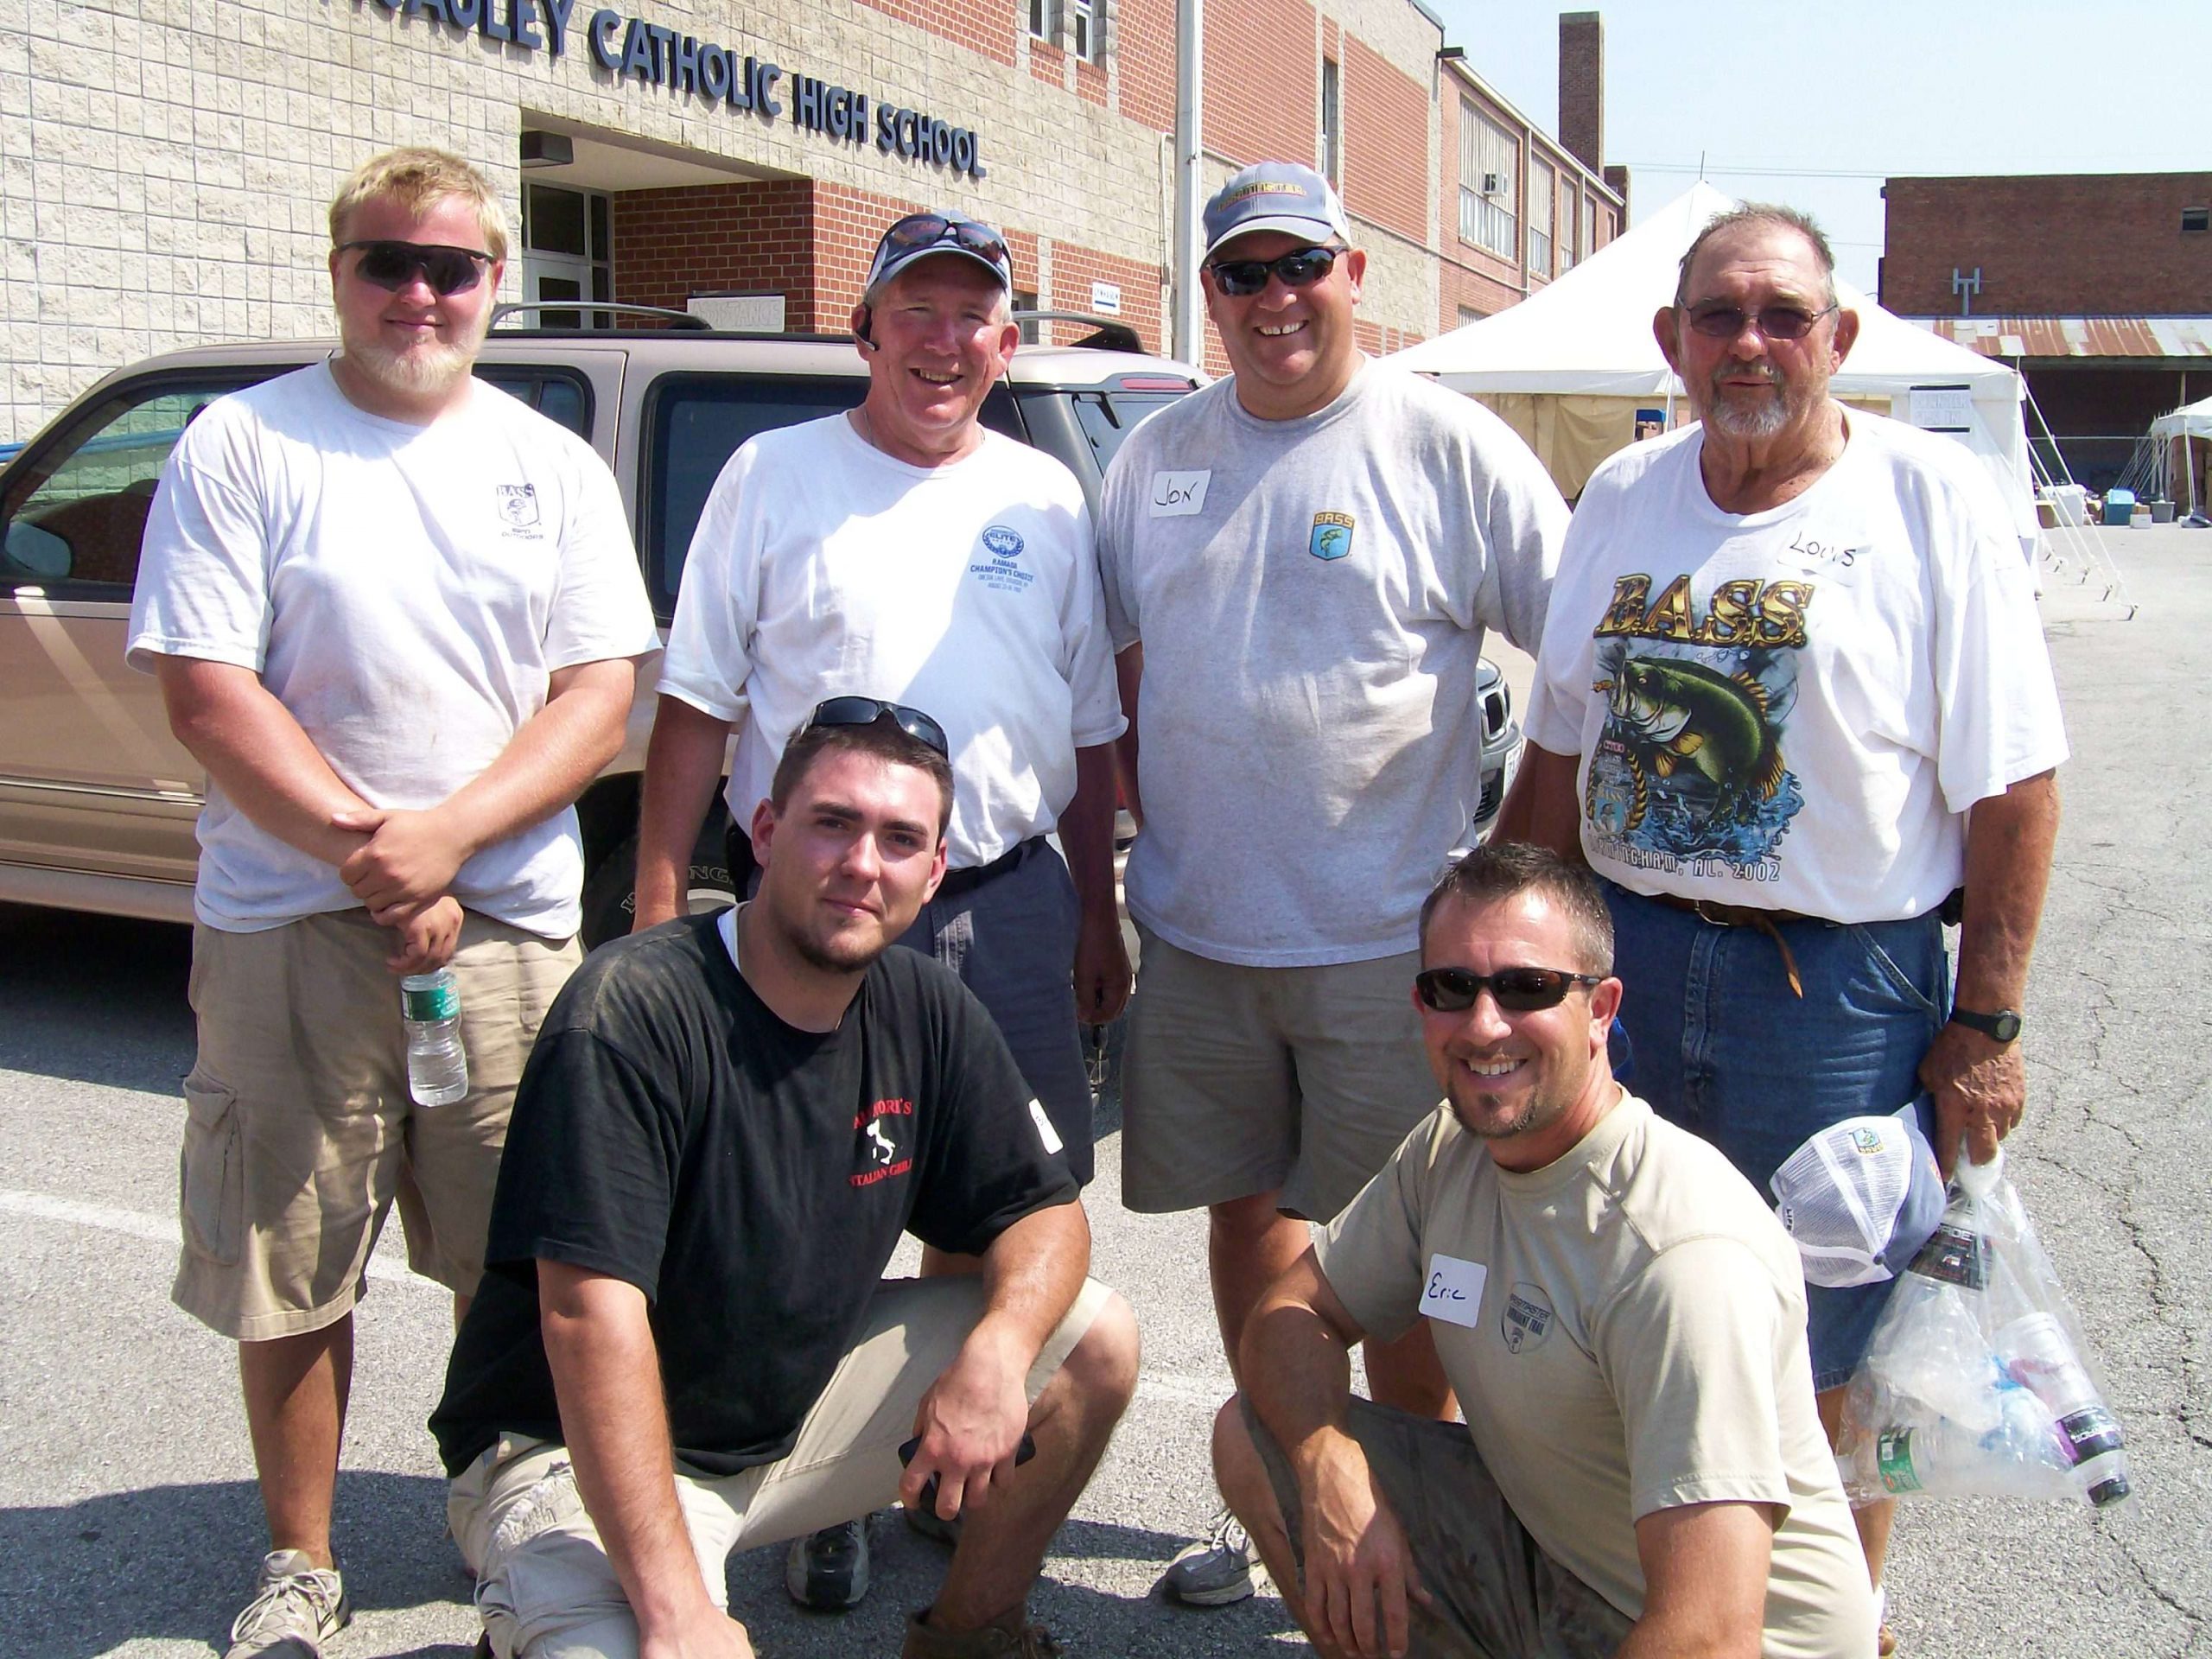 <p>
	Assisting in the cleanup effort were (Front row, from left) Volunteer coordinator Brandon Chamberlain and B.A.S.S. Federation Nation tournament staffers Eric Nichols and (back row) Brett Stewart, Mike Wall, Jon Stewart and Pee Wee Powers.</p>
